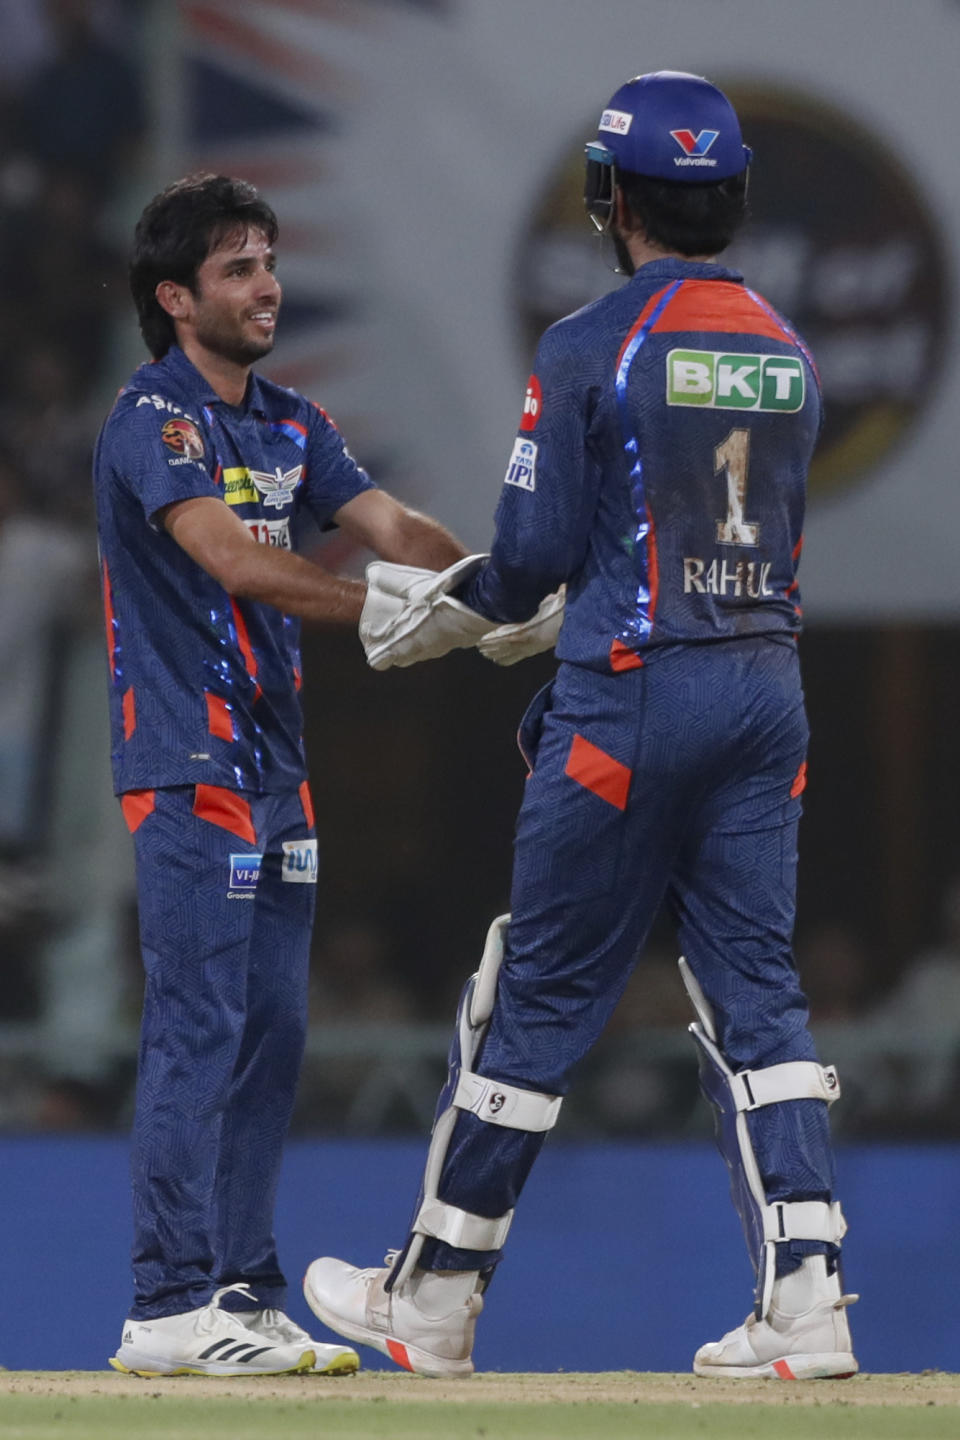 Lucknow Super Giants' Ravi Bishnoi, left, celebrates the wicket of Kolkata Knight Riders' Sunil Narine with his teammate during the Indian Premier League cricket match between Lucknow Super Giants and Kolkata Knight Riders in Lucknow, India, Tuesday, May 5, 2024. (AP Photo/Pankaj Nangia)